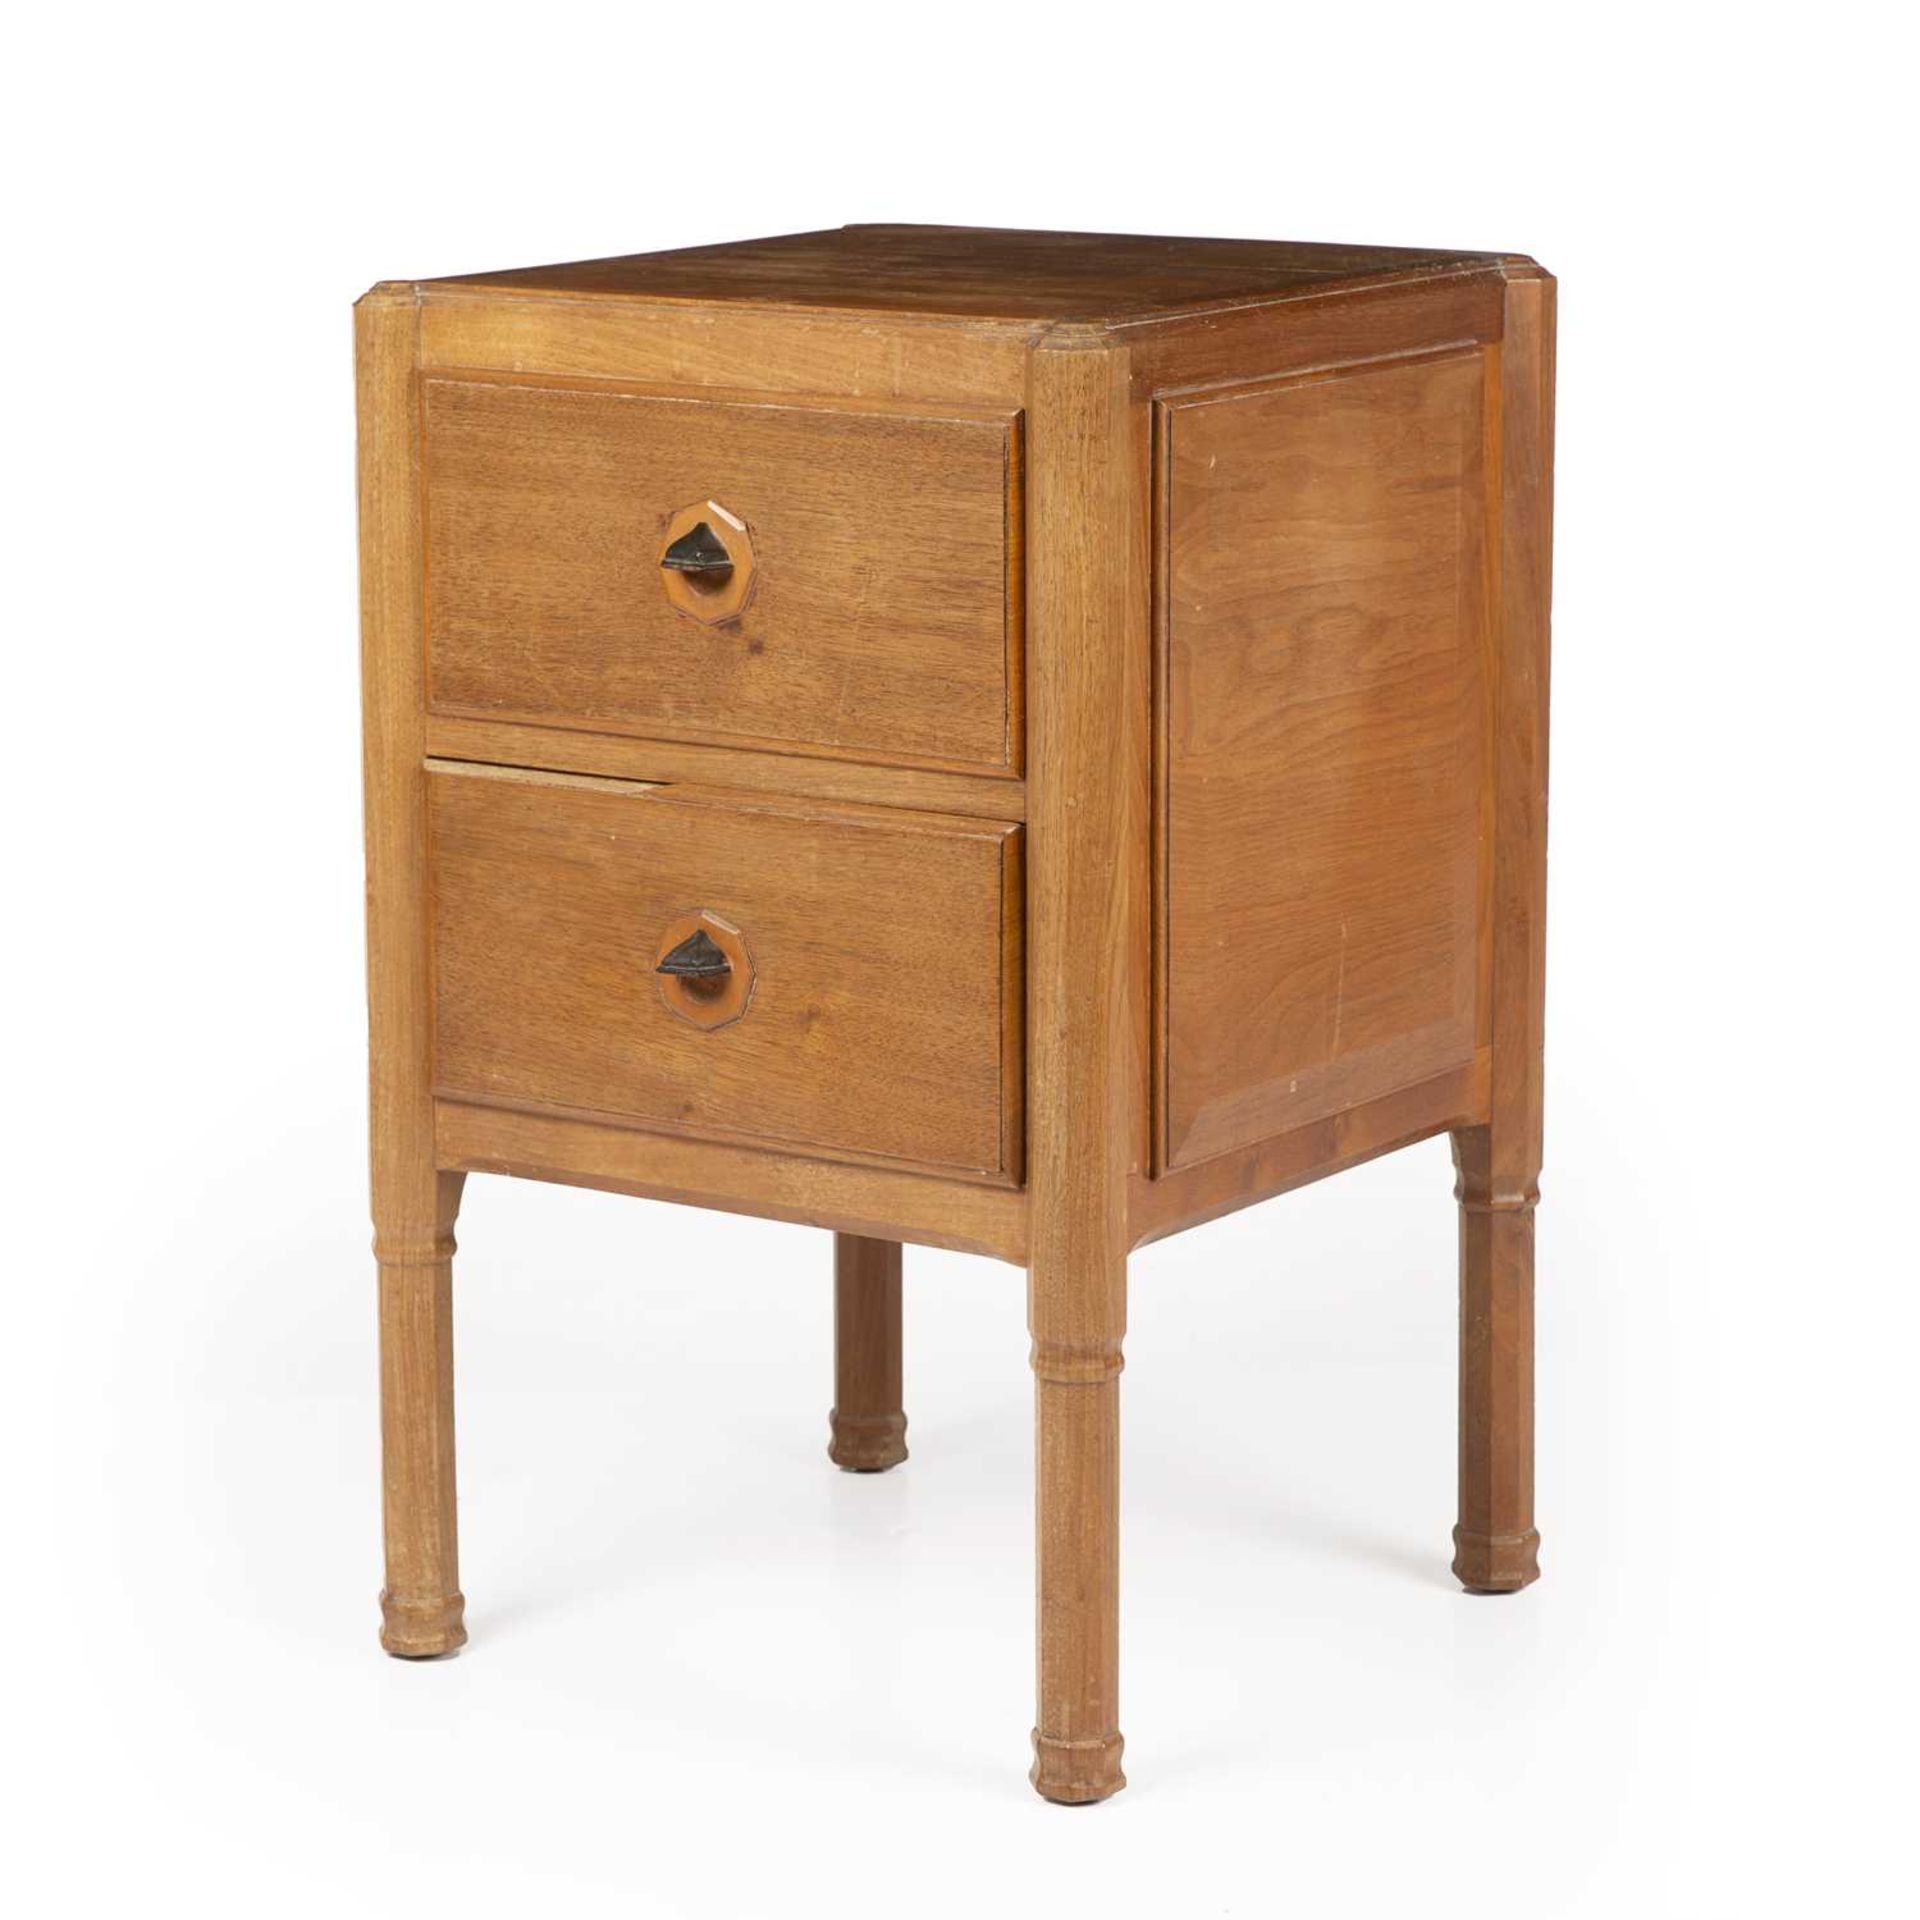 Gordon Russell (1892-1980) Bedside cabinet walnut, with two drawers with ebony handles above - Image 4 of 6